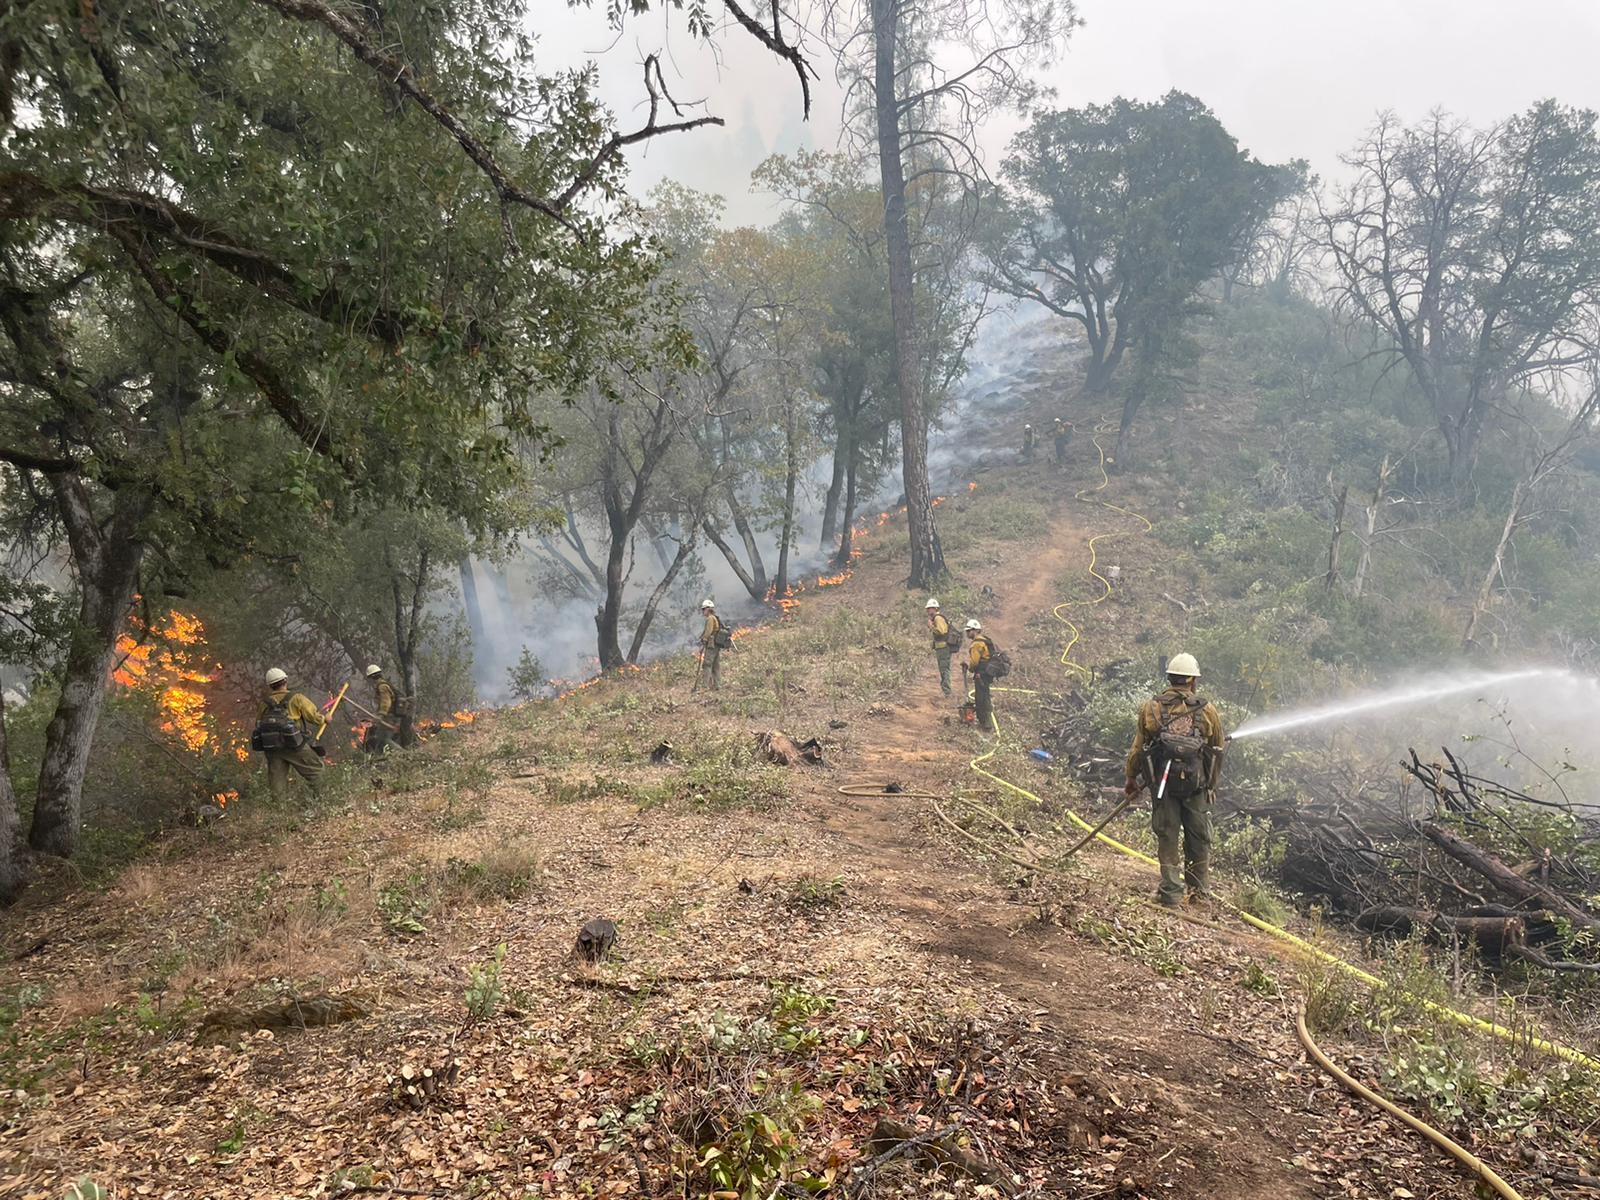 firefighters on a ridgetop cleared of vegetation, monitoring low-intensity fire, spraying water on some of the flames